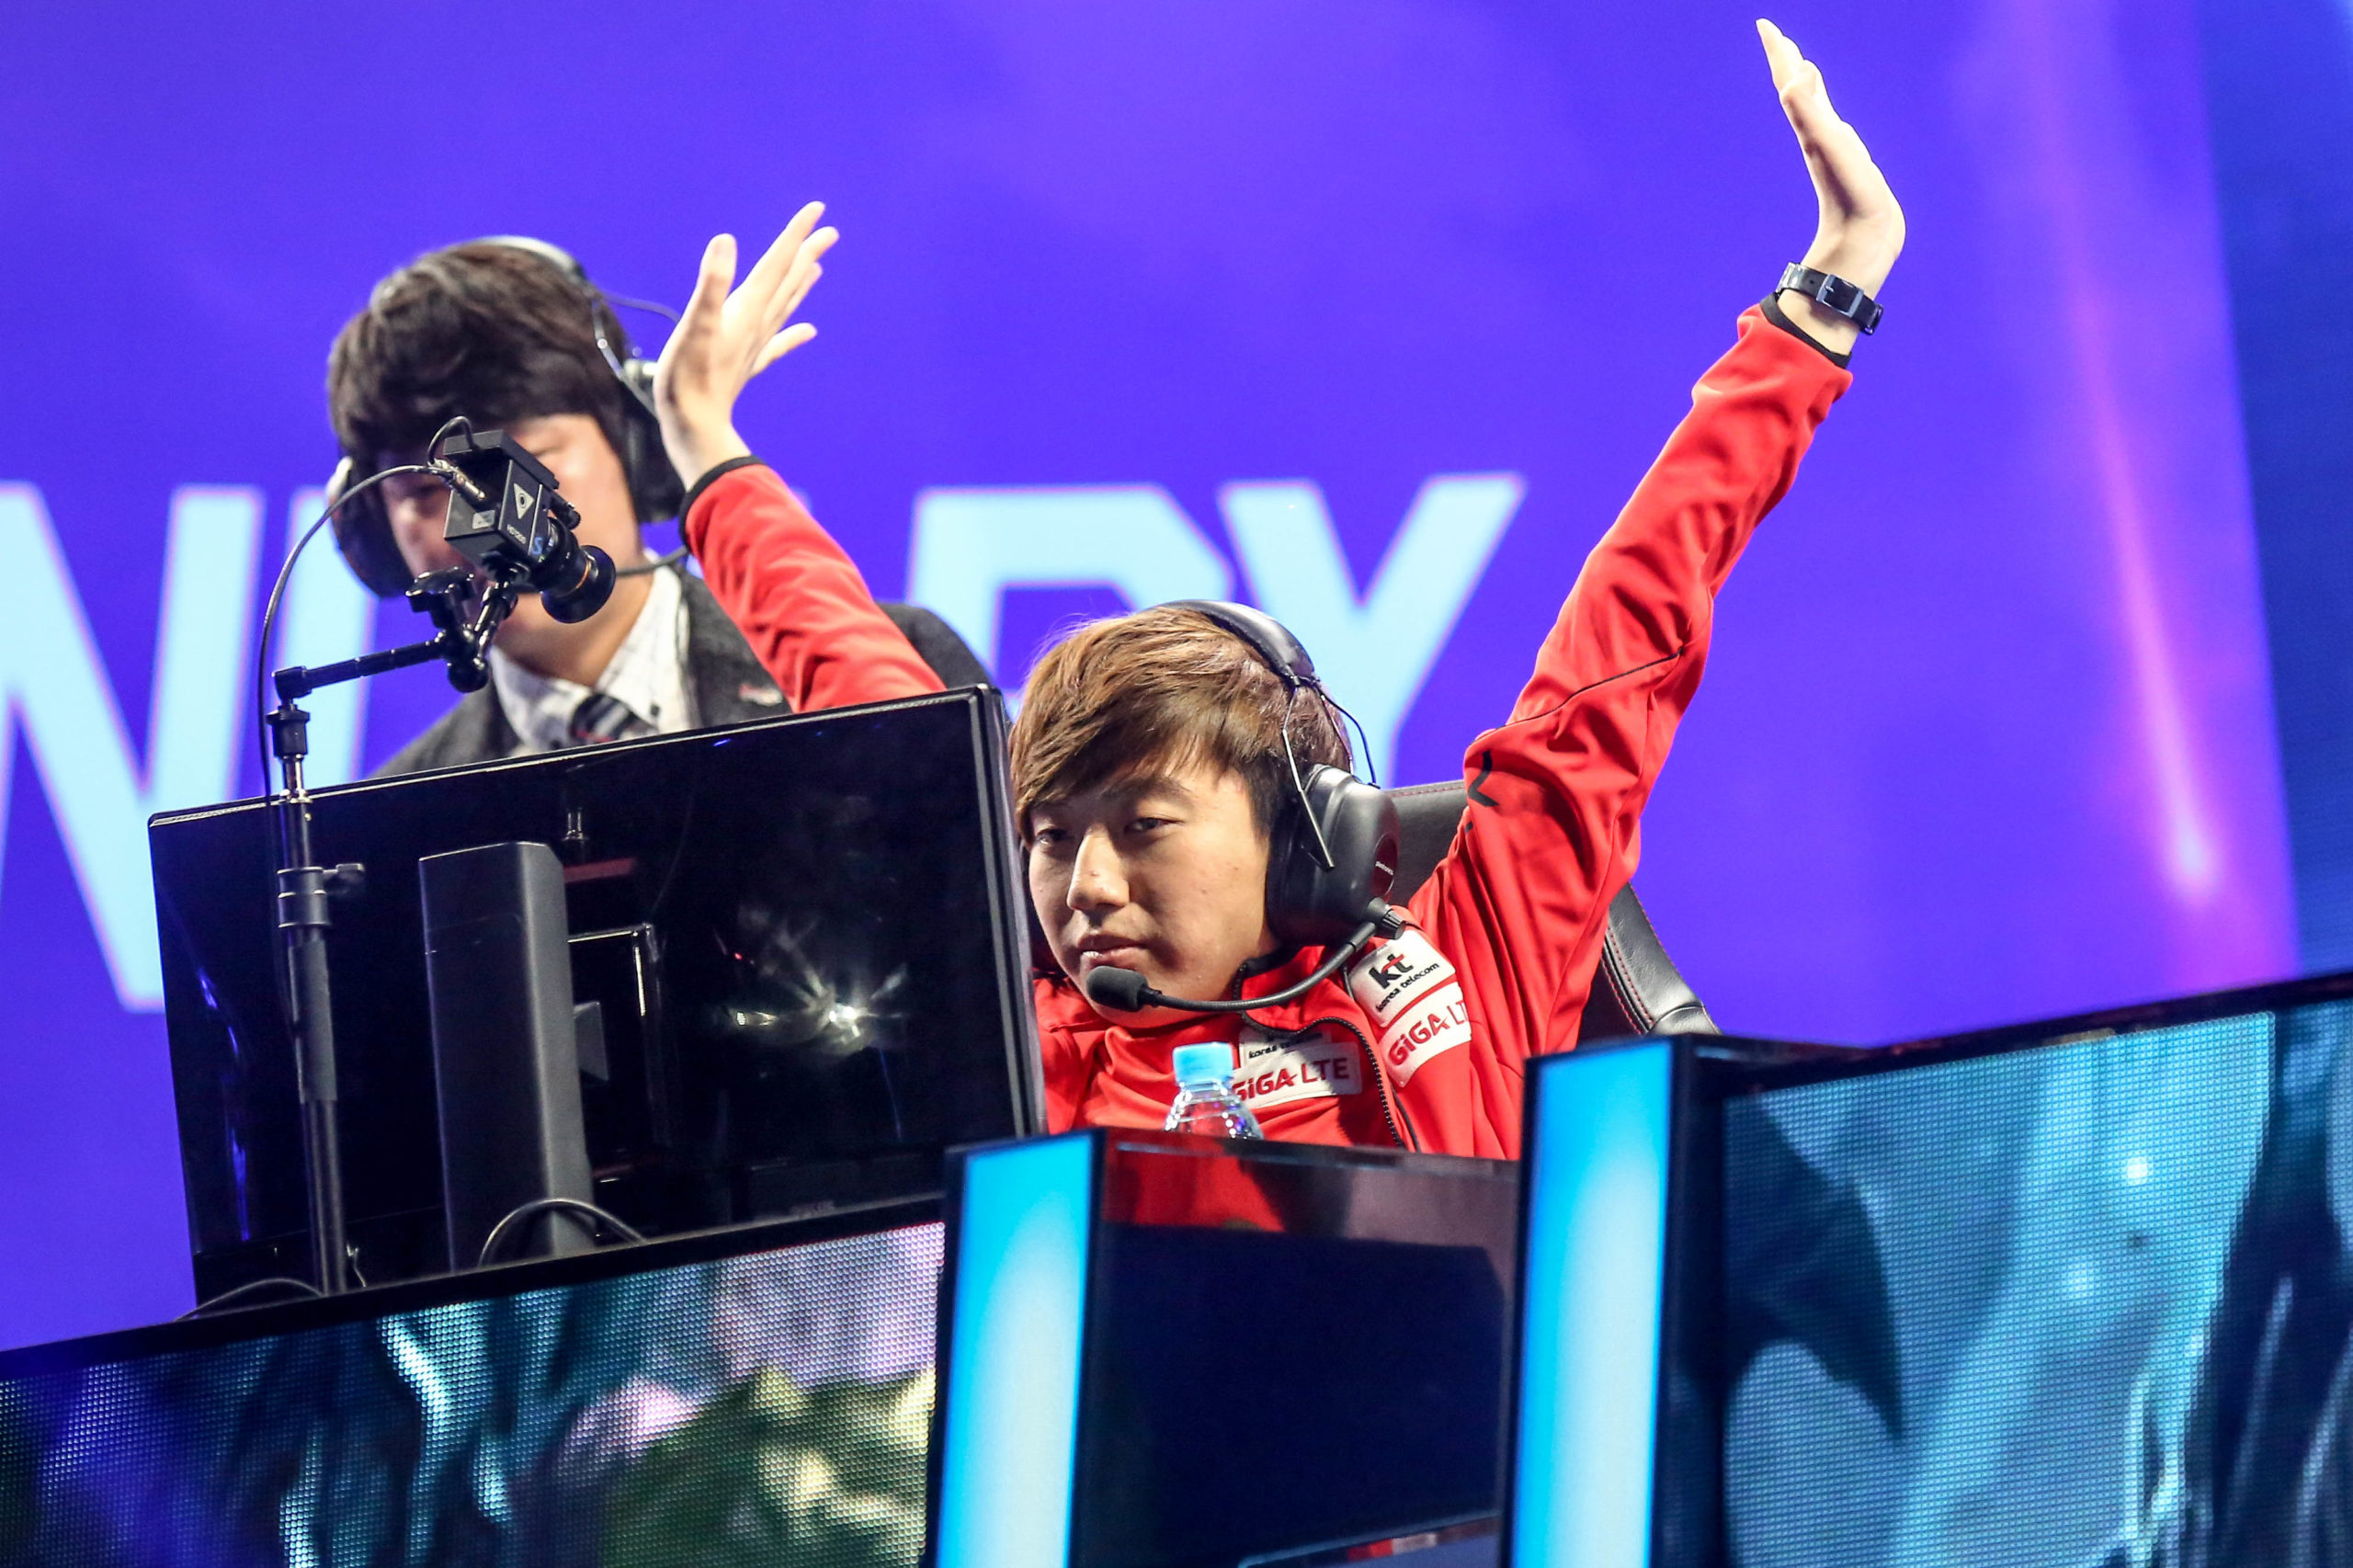 What To Watch Out For This Weekend At The League Of Legends Championships